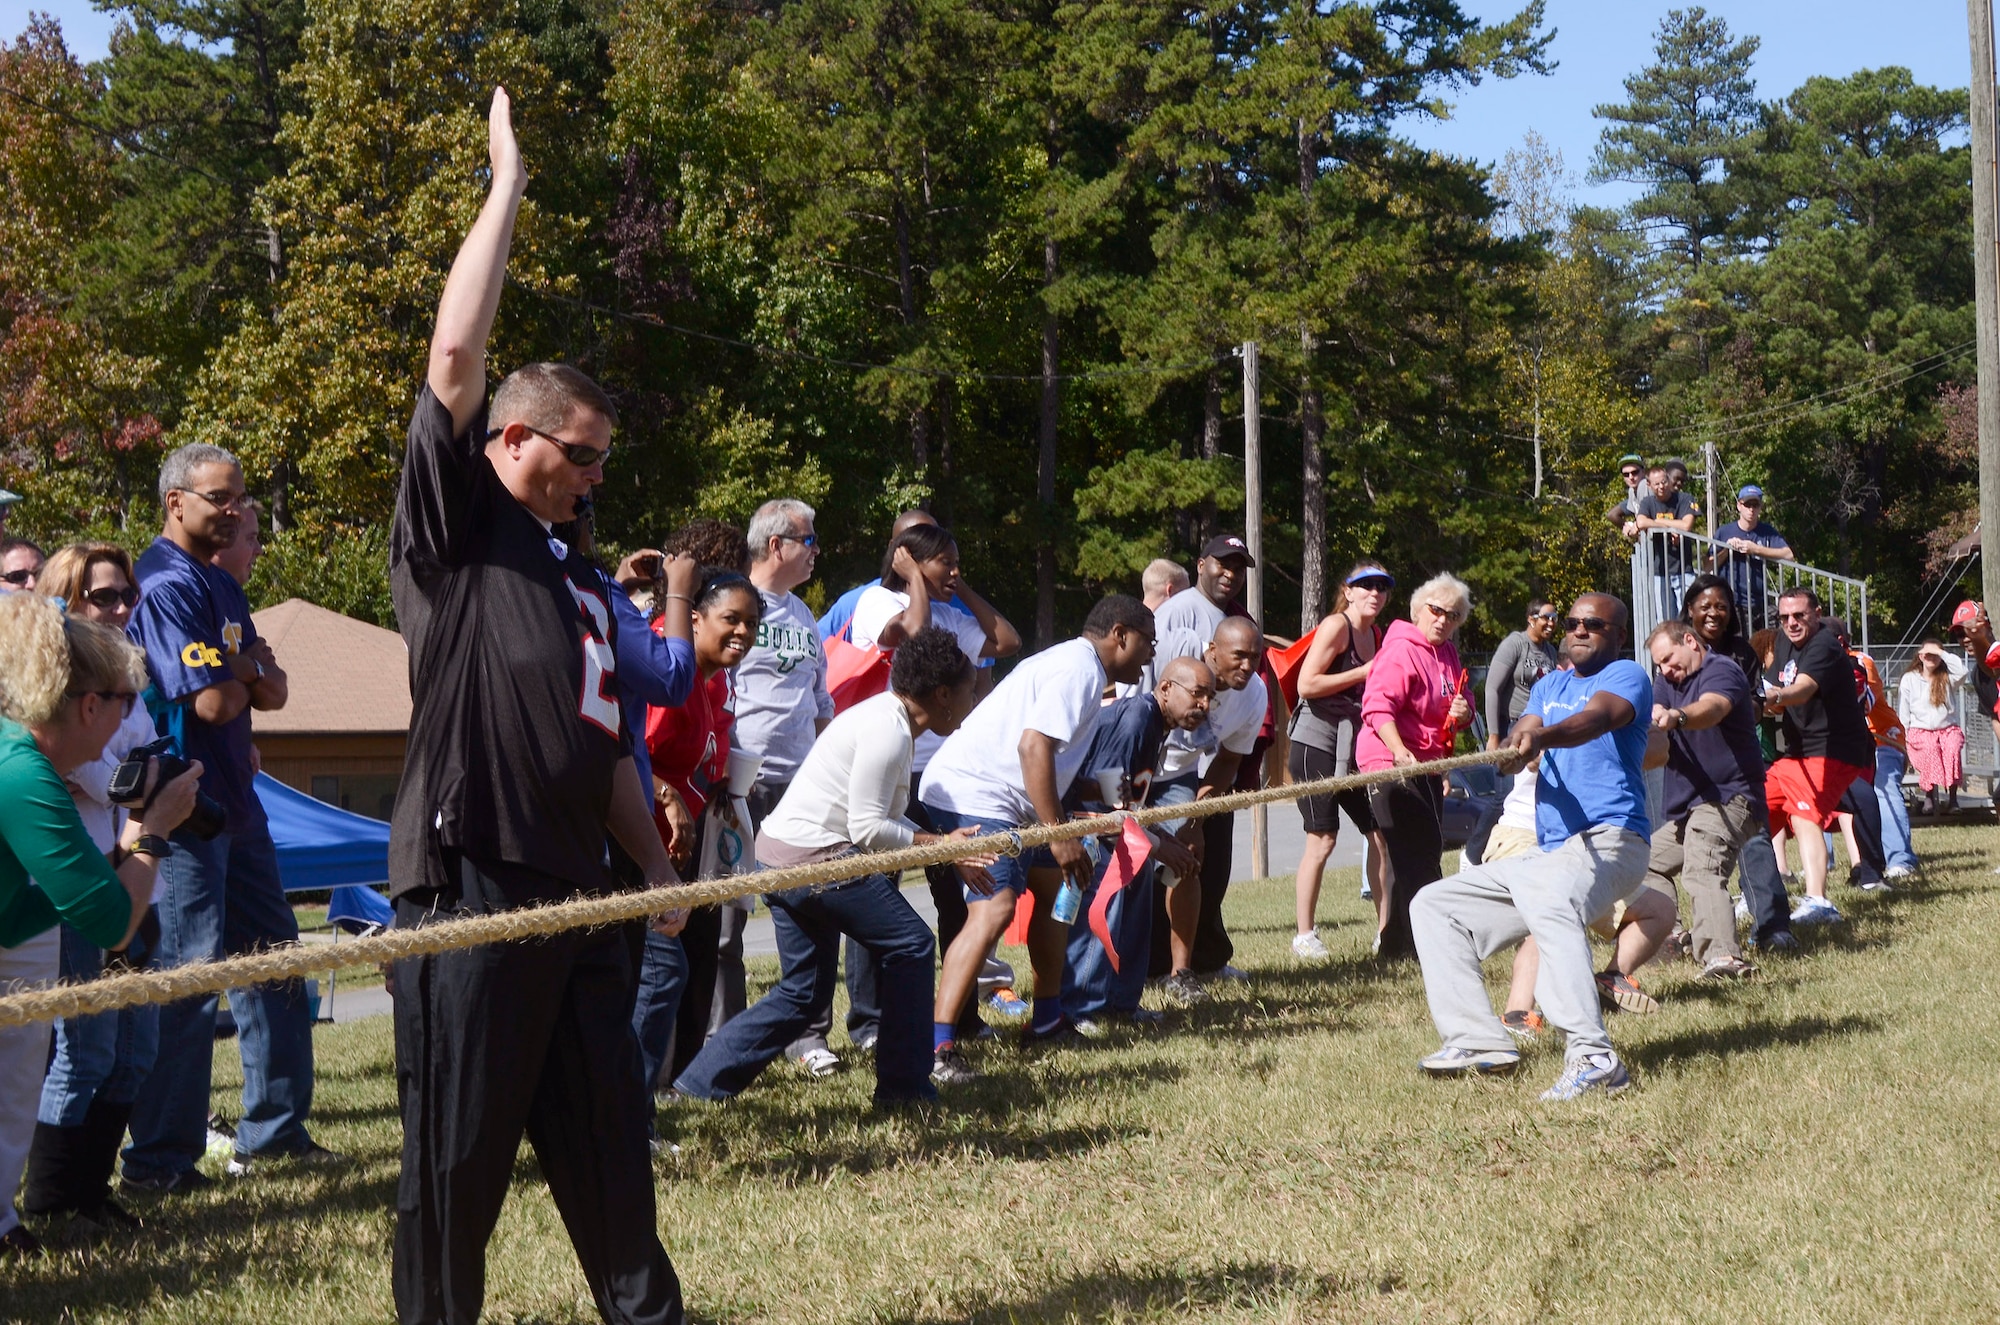 Senior Master Sgt. Rocky R. Epps, from the 94th Security Forces Squadron officiates as Teams battle it out at a Tug of war, capping off the day’s sporting events during the annual 94th Airlift Wing Team Day held at Dobbins Air Reserve Base, Ga., Oct. 16. Team day is designed to promote team work and competitive spirit between units. (U.S. Air Force photo/Don Peek)